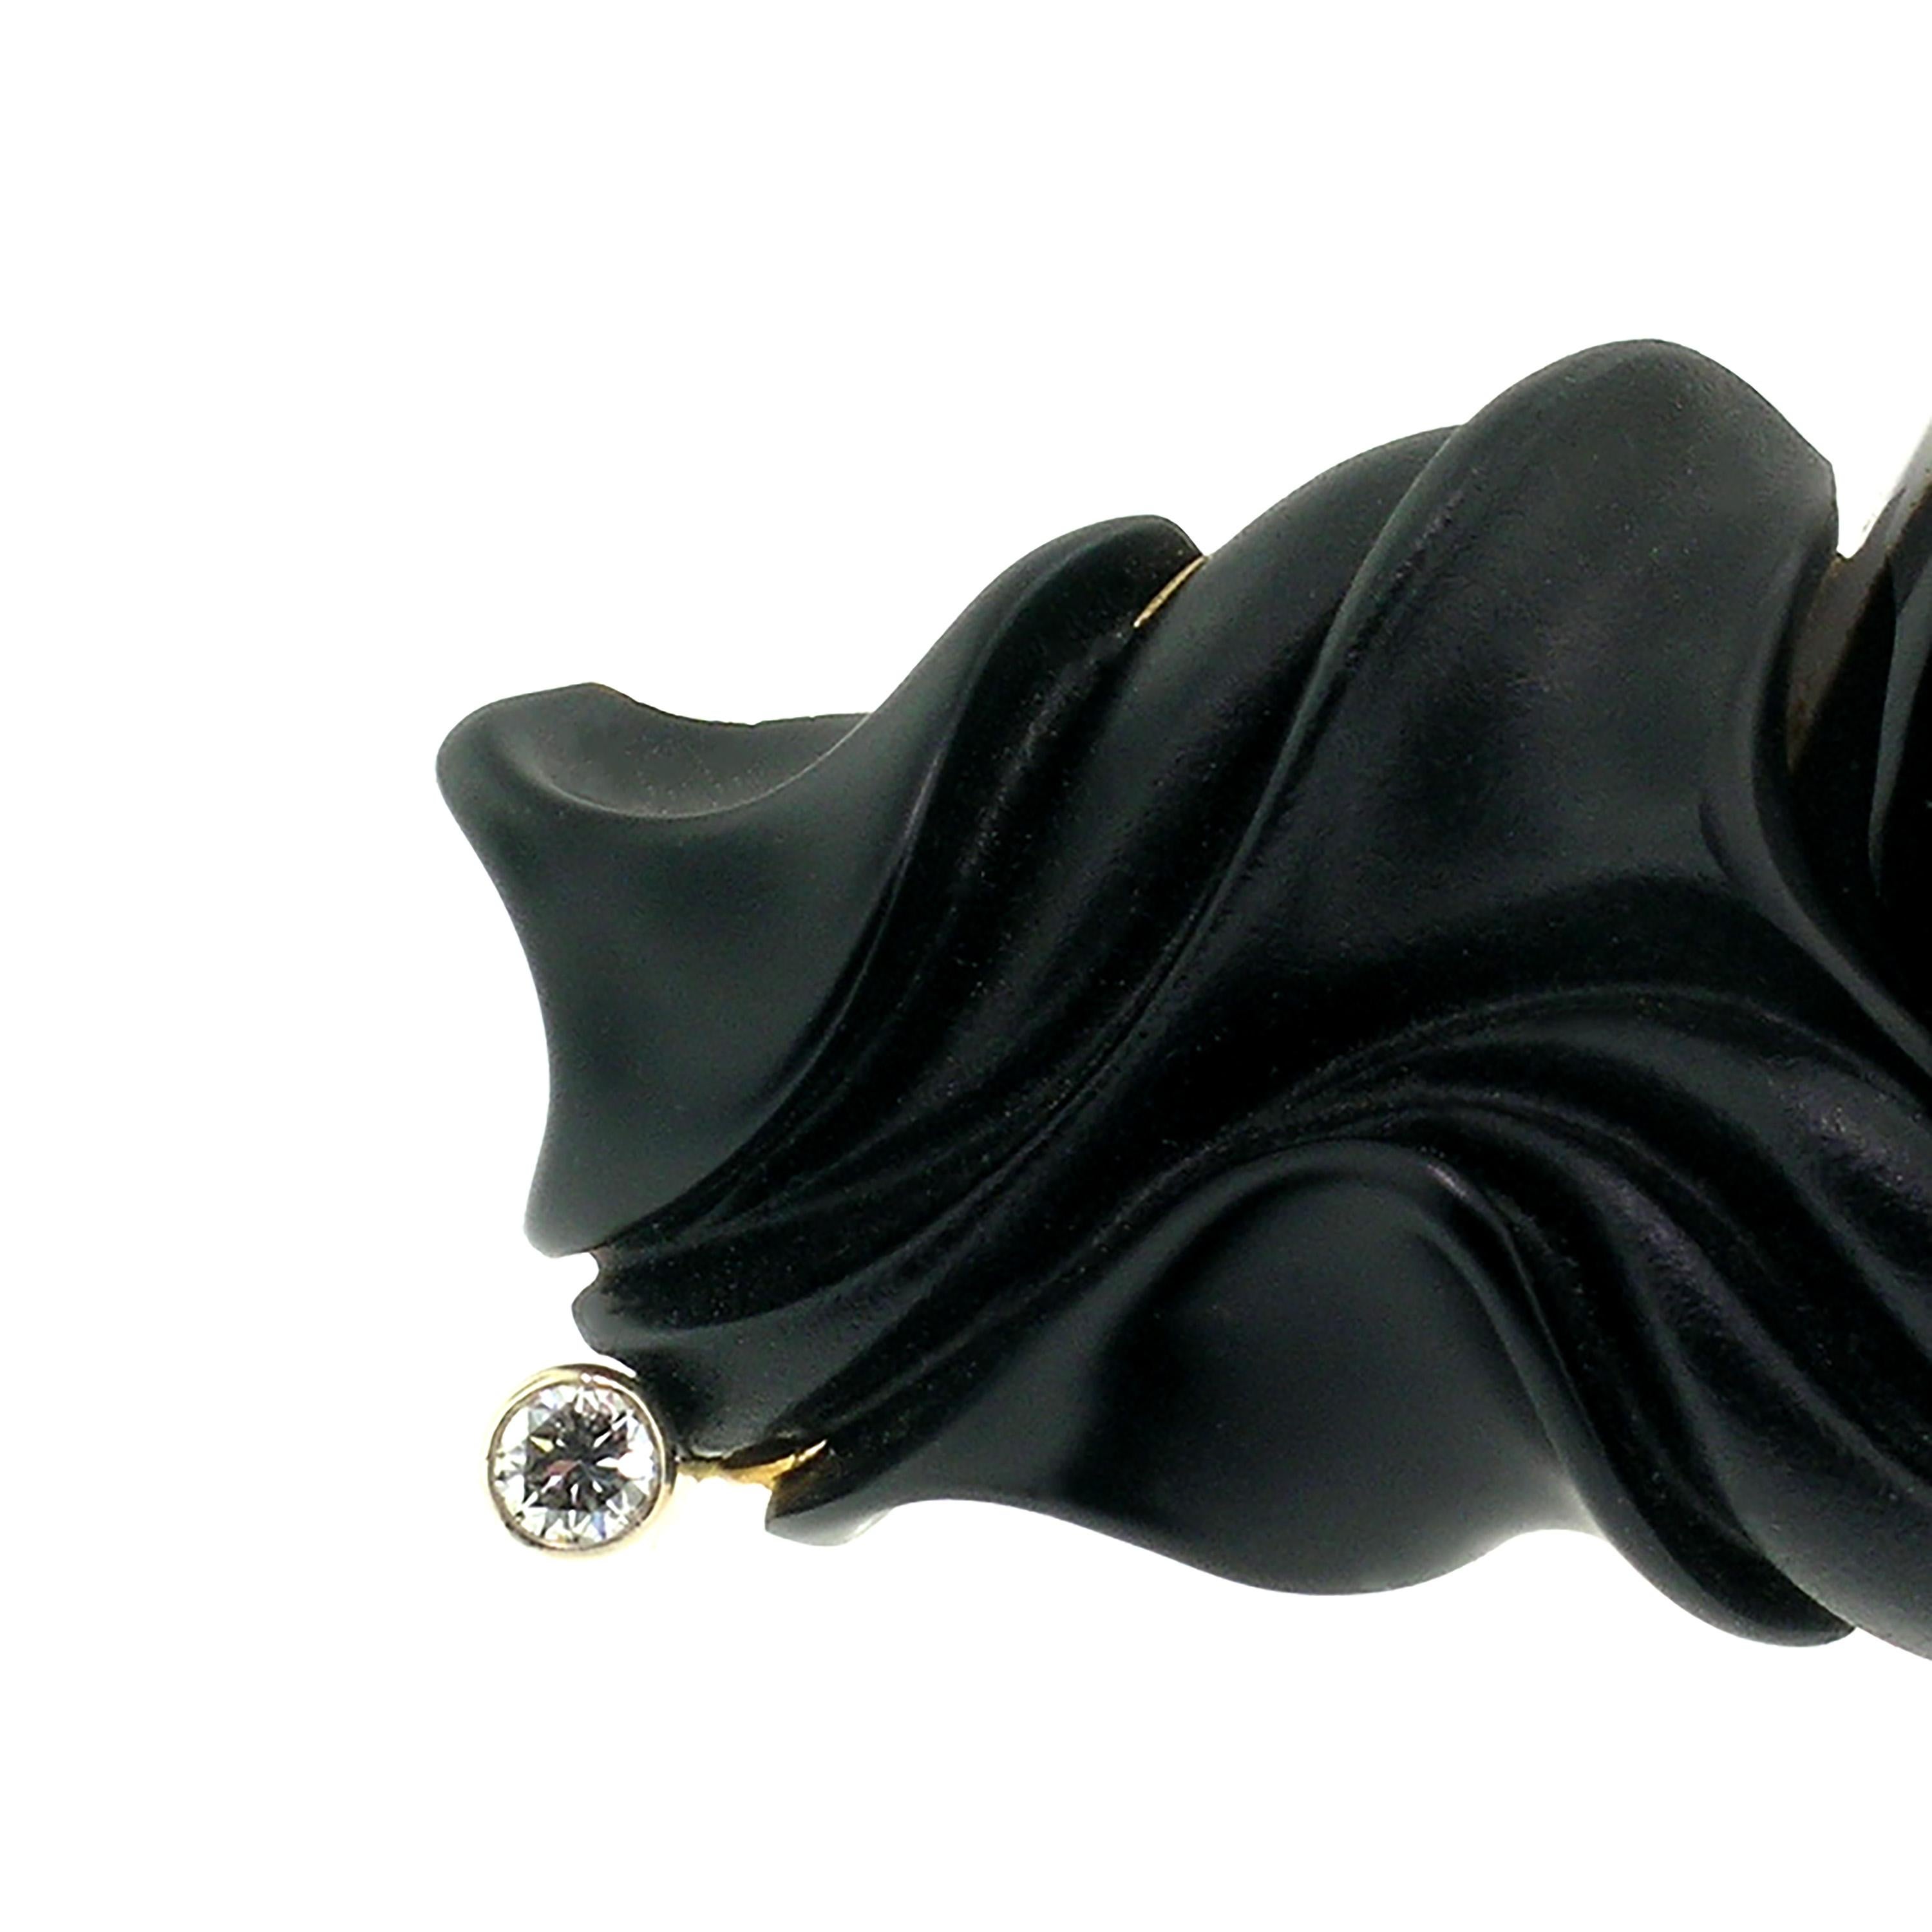 Unique style and elegance abound in this wearable ART Guyon designed piece of jewelry. The natural black chalcedony sculpture by Steve Walters gracefully folds around the gorgeously plumed fan of Montana agate. 

The hand-fabricated 18kt mounting